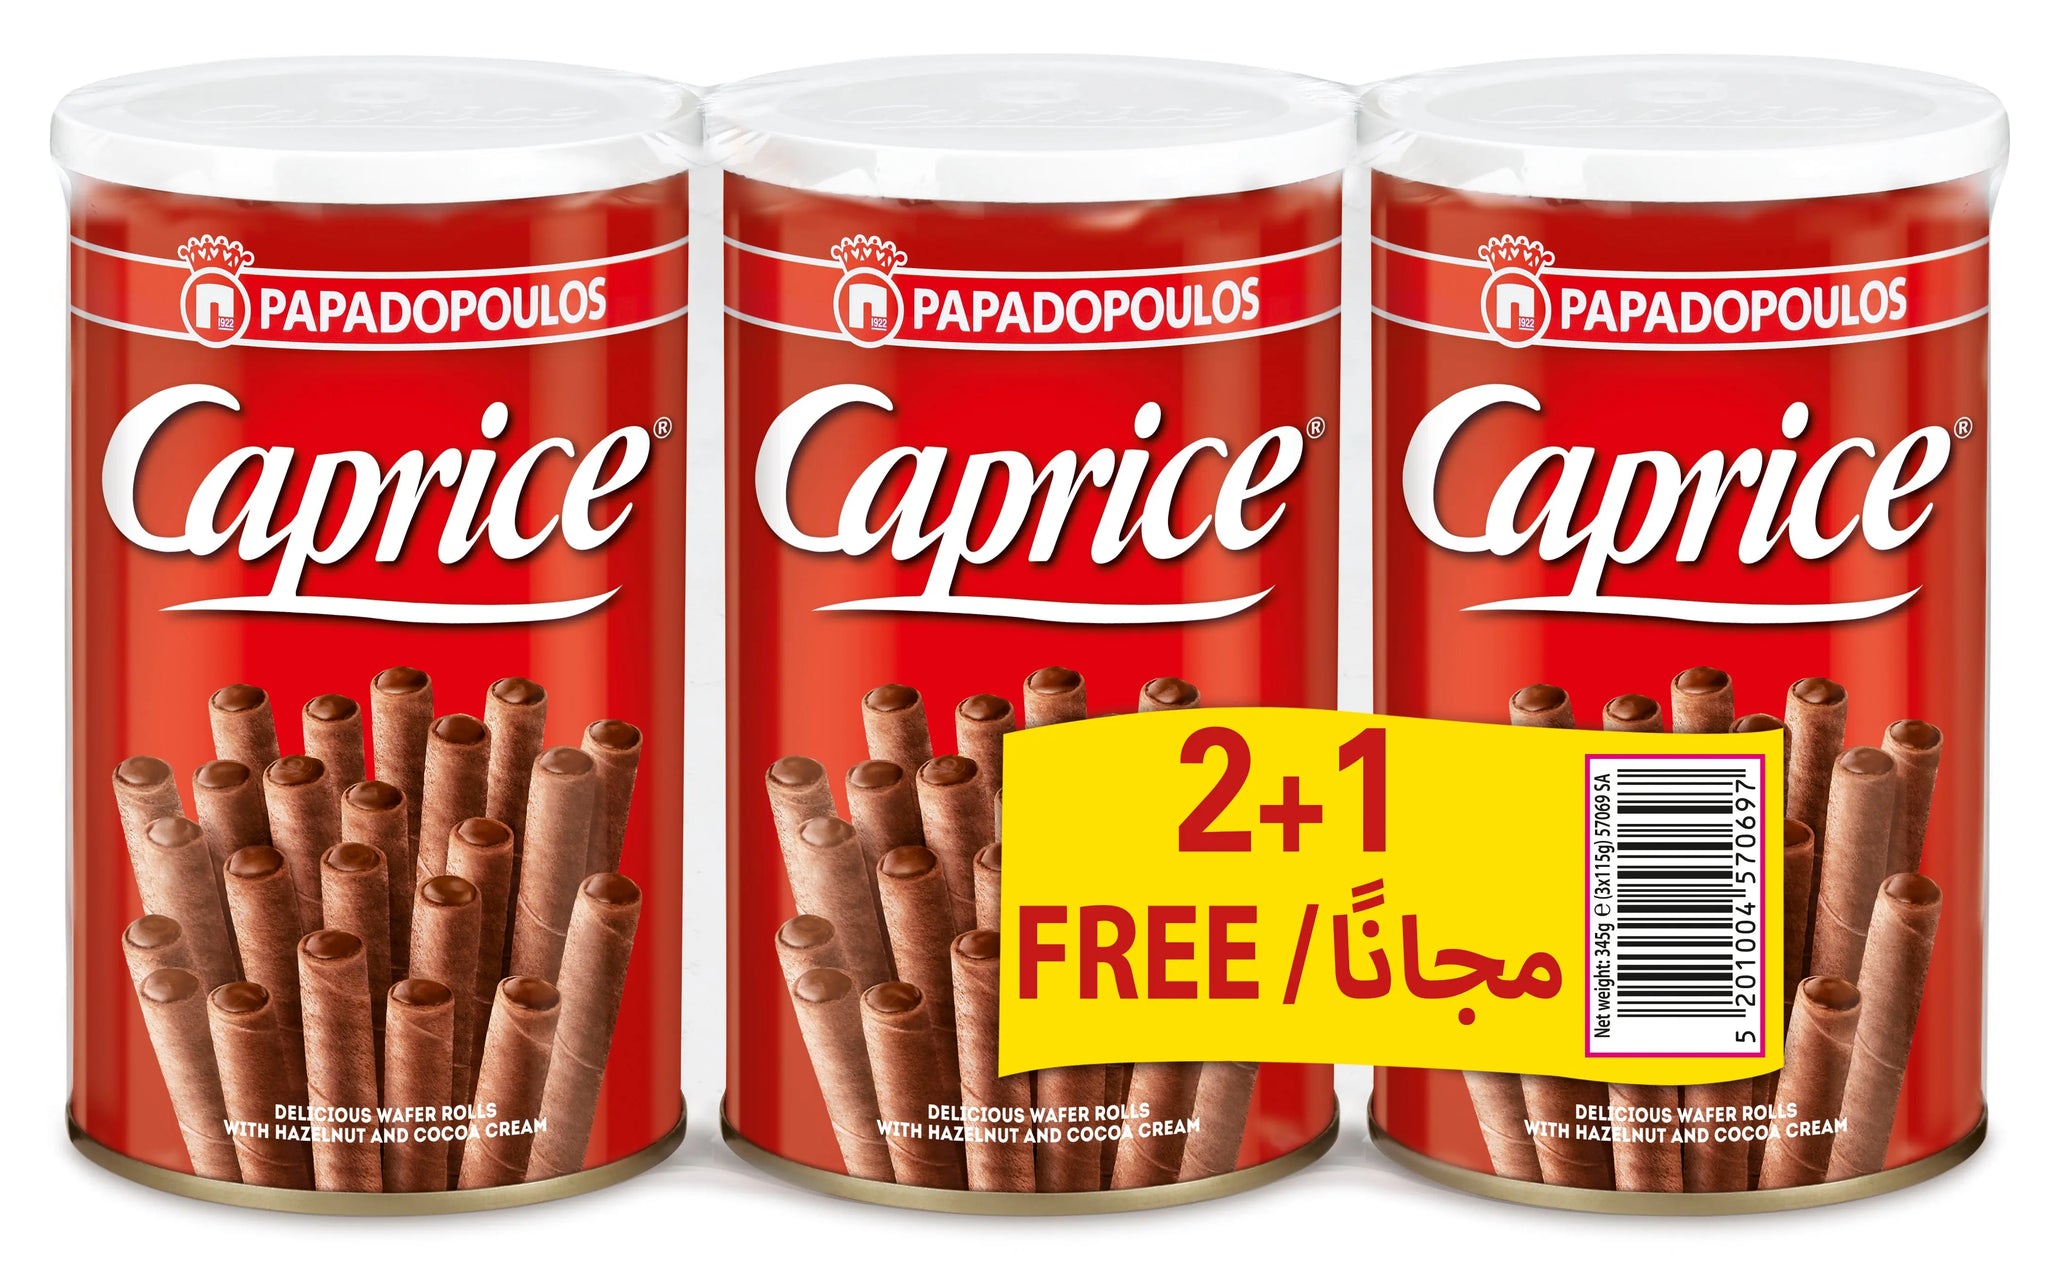 Papadopoulos Caprice Wafer Rolls with Cappuccino Cream 250g Tin